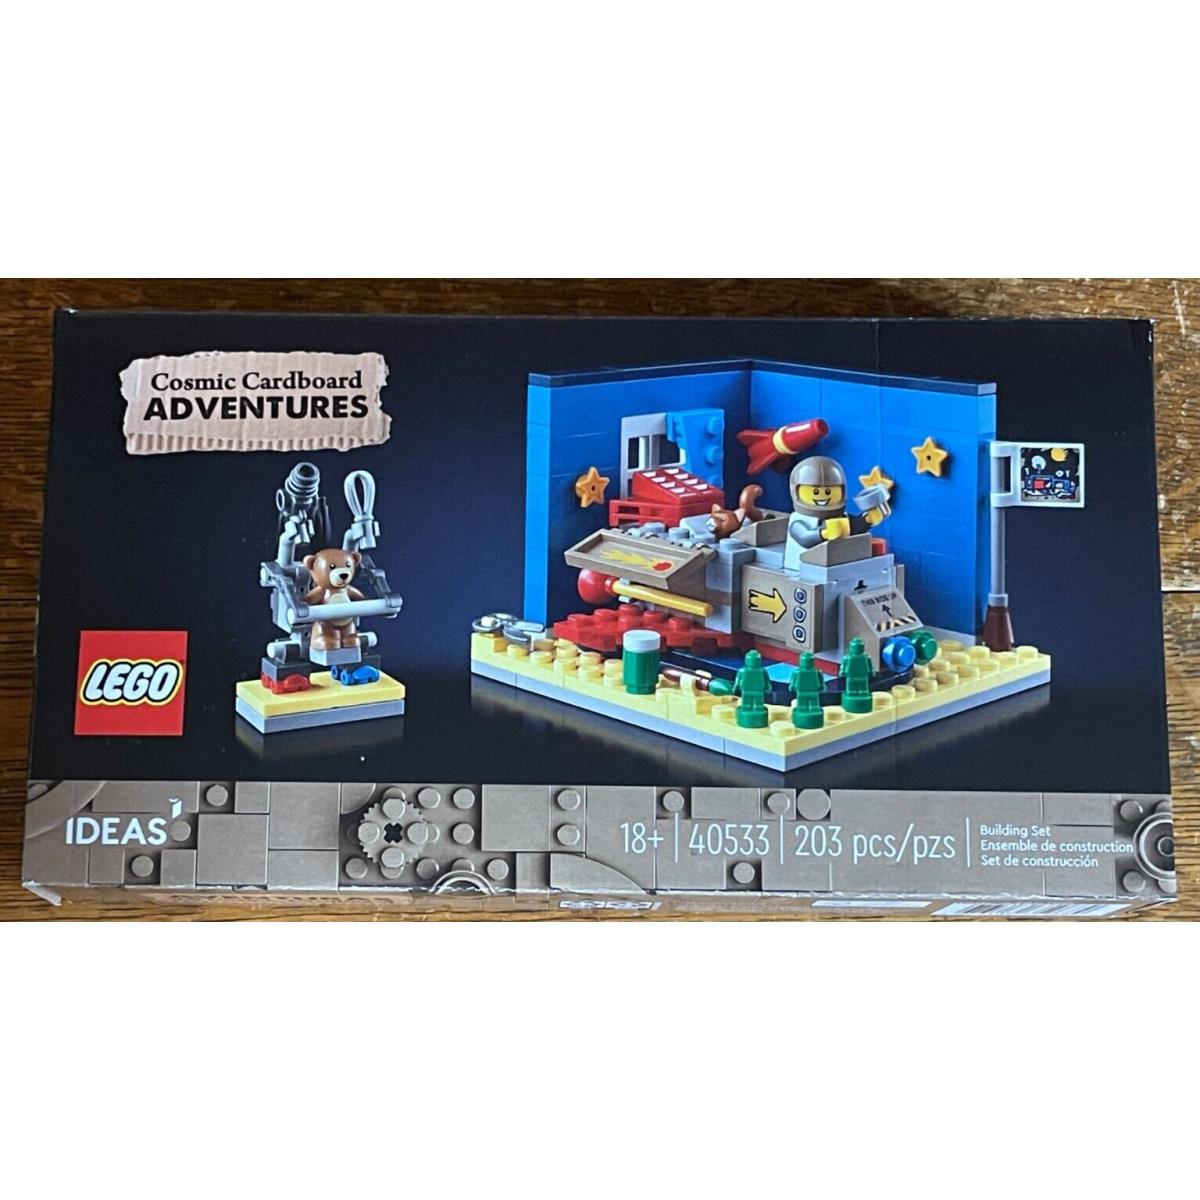 40533 Lego Cosmic Cardboard Adventures Child`s Room Playing Gwp